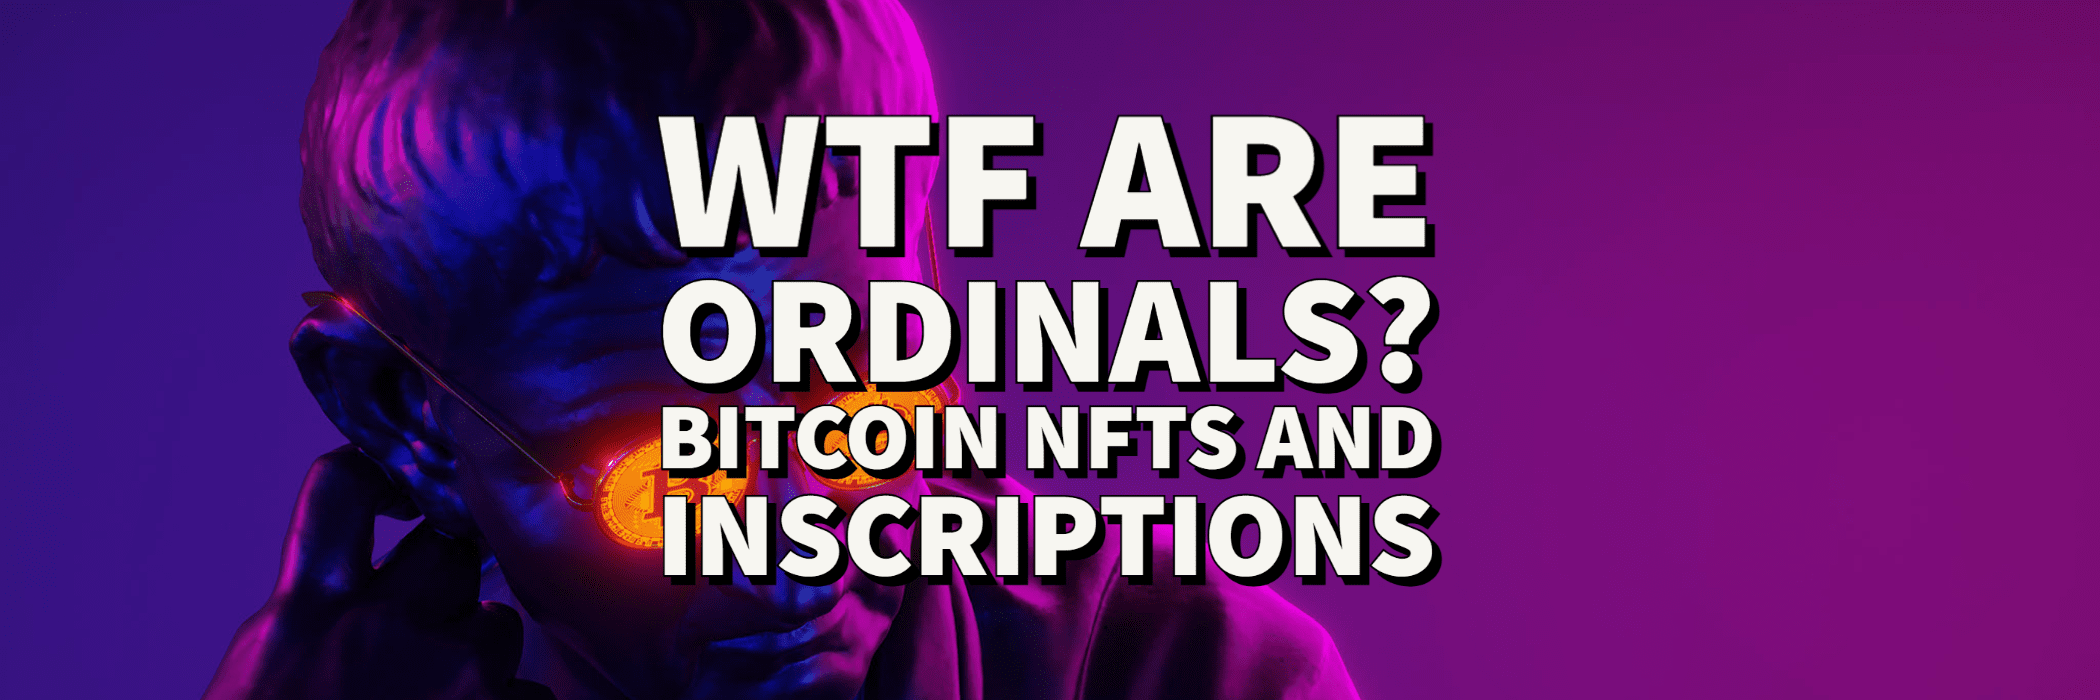 Ordinals are Bitcoin NFTs an Overview on Inscriptions